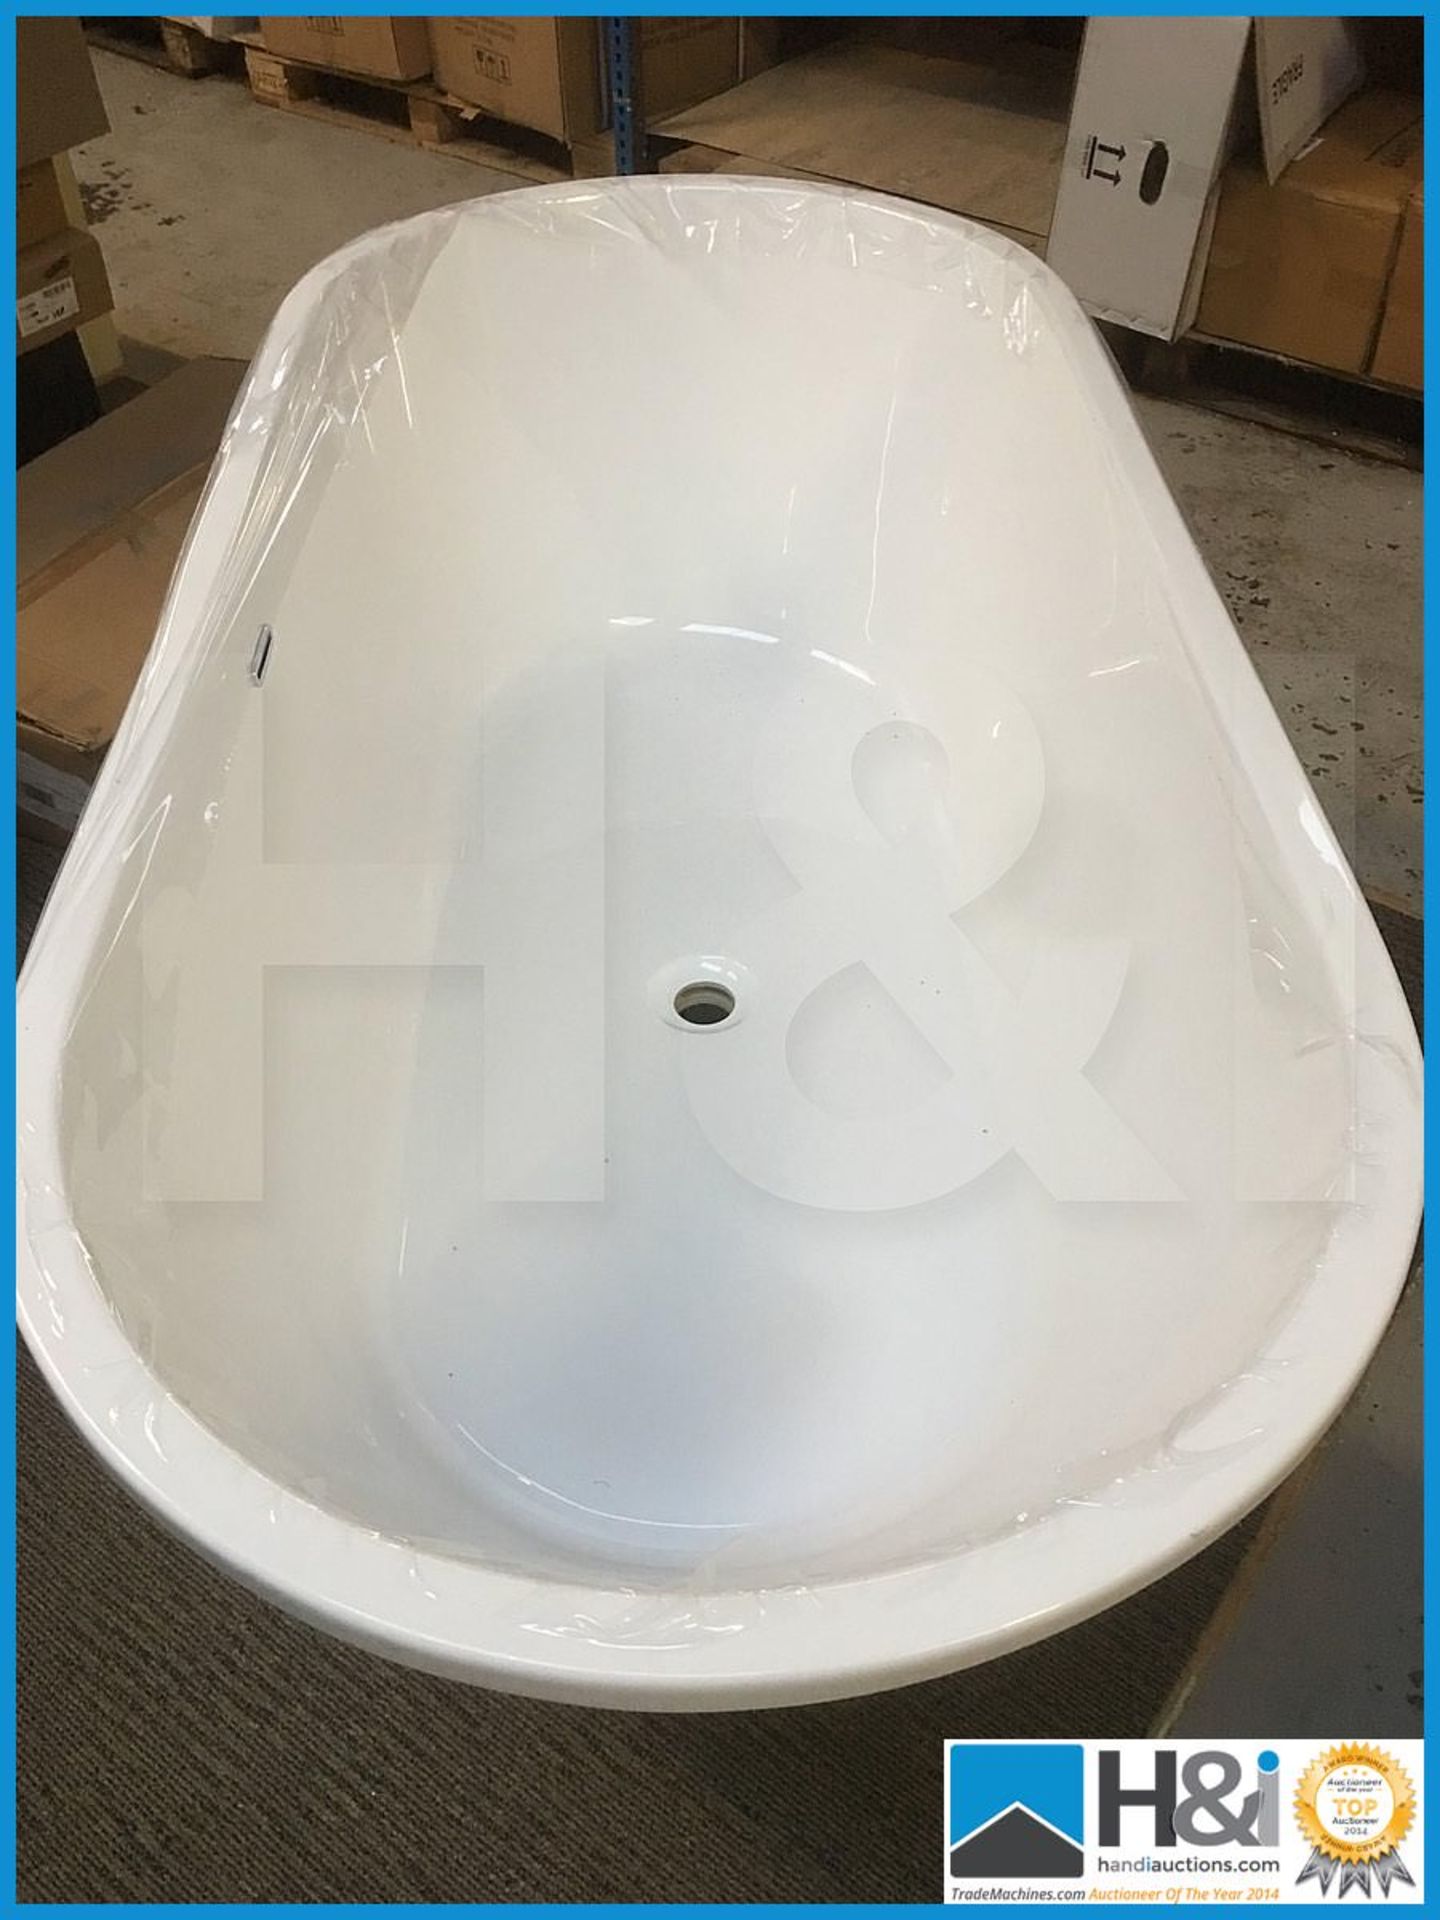 Stunning Hudson Reed Wycomber freestanding bathtub compete with traditional claw feet. High - Image 4 of 4